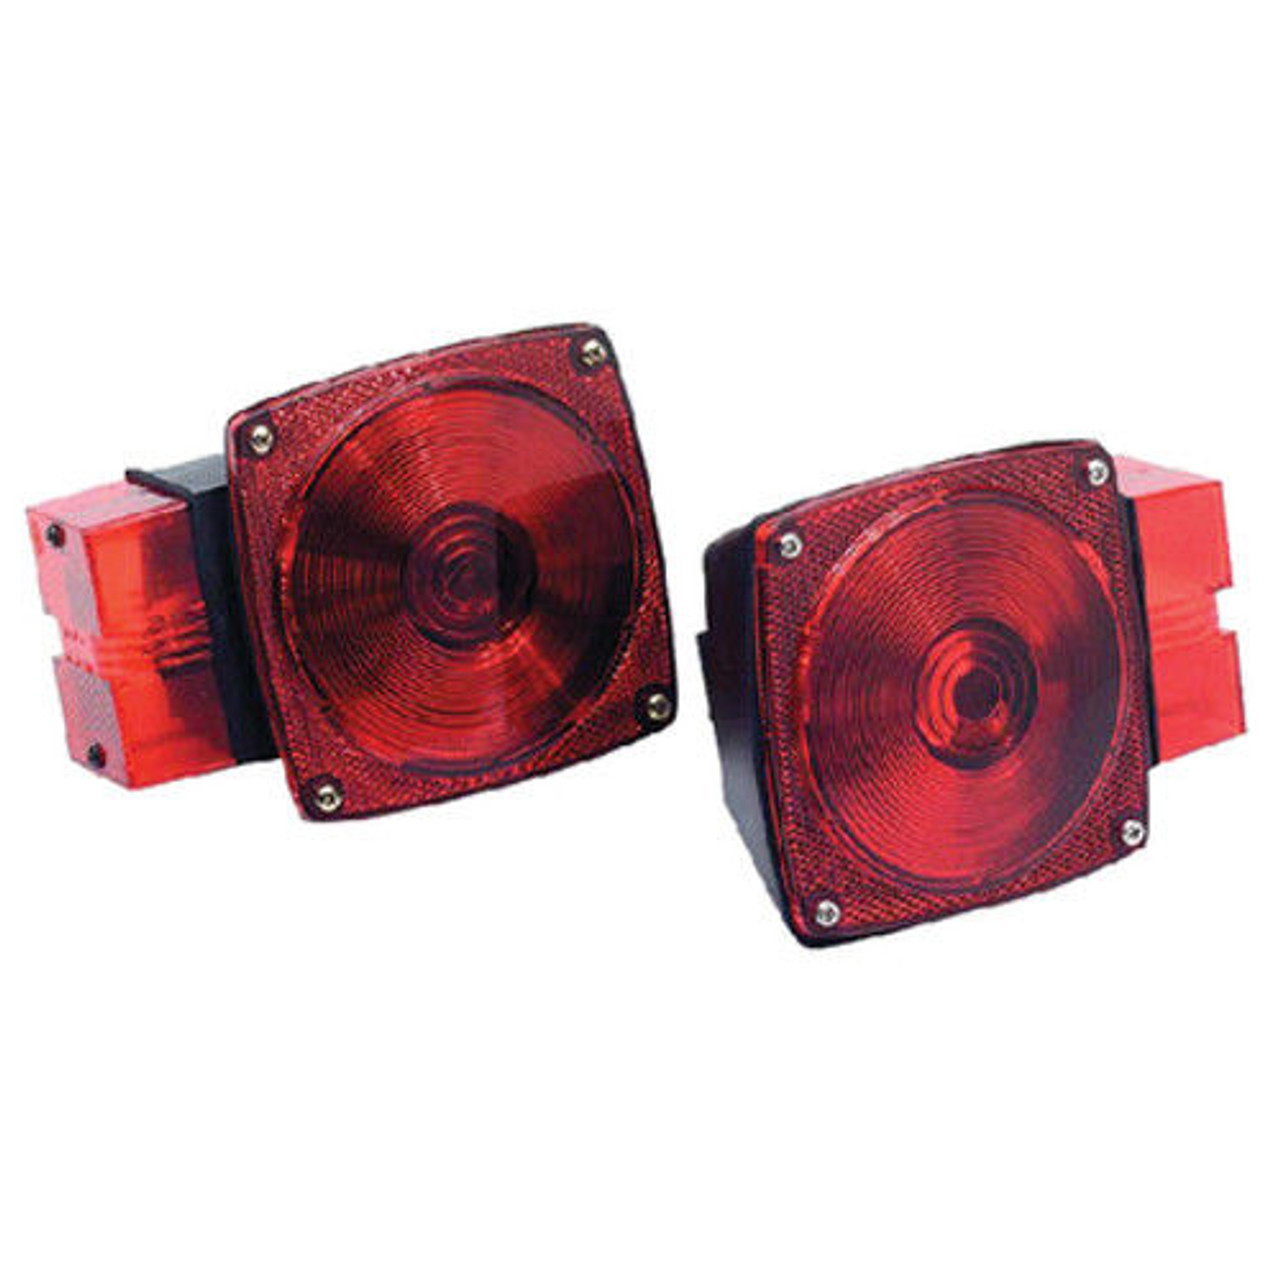 Submersible Over 80 Inch Wide Boat Trailer Tail Light Set